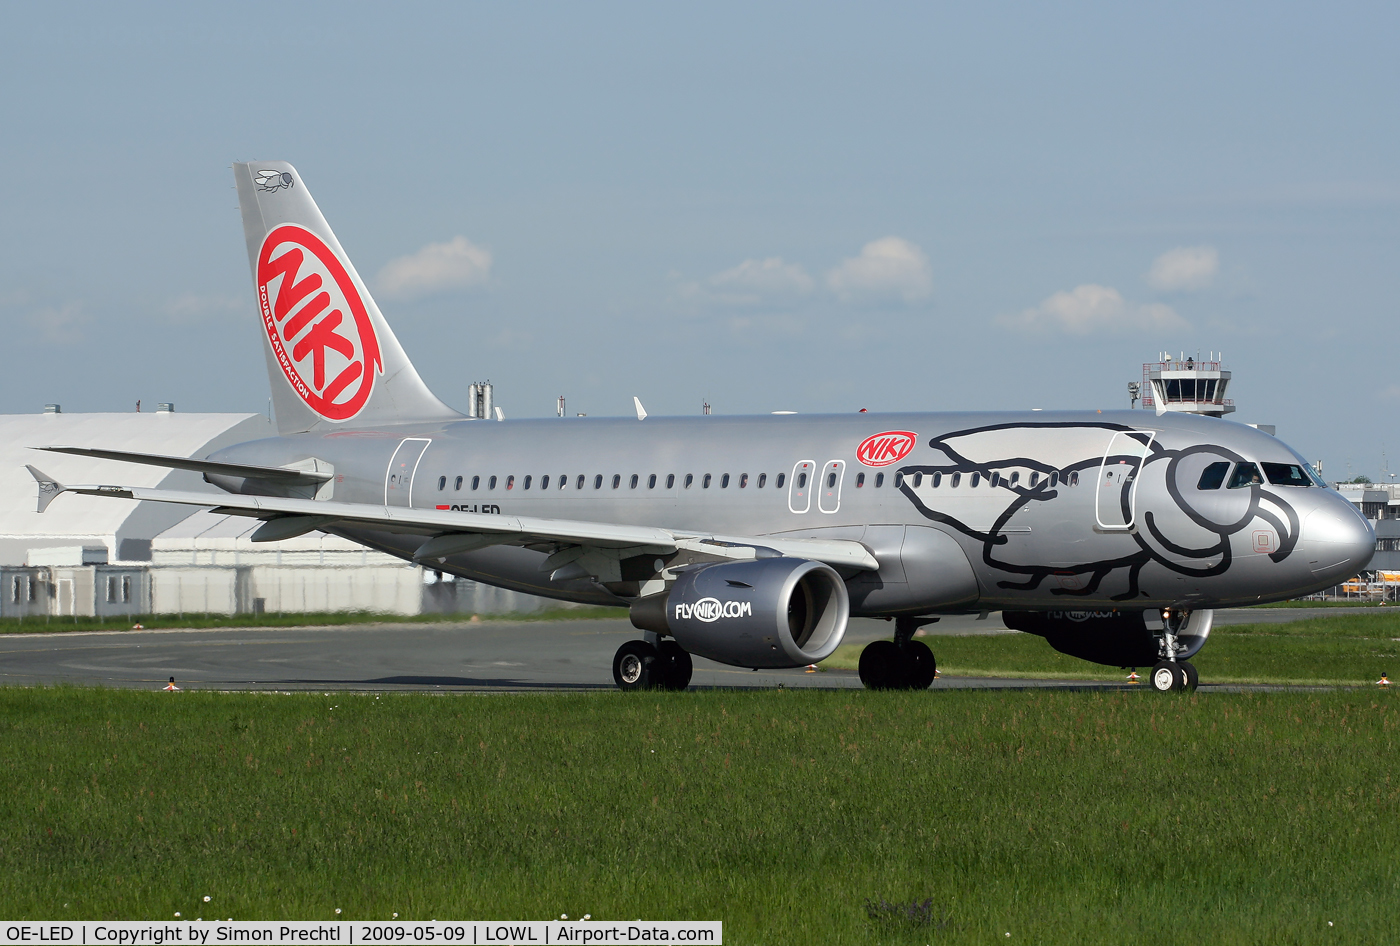 OE-LED, 2008 Airbus A319-112 C/N 3407, OE-LED @ Linz Airport